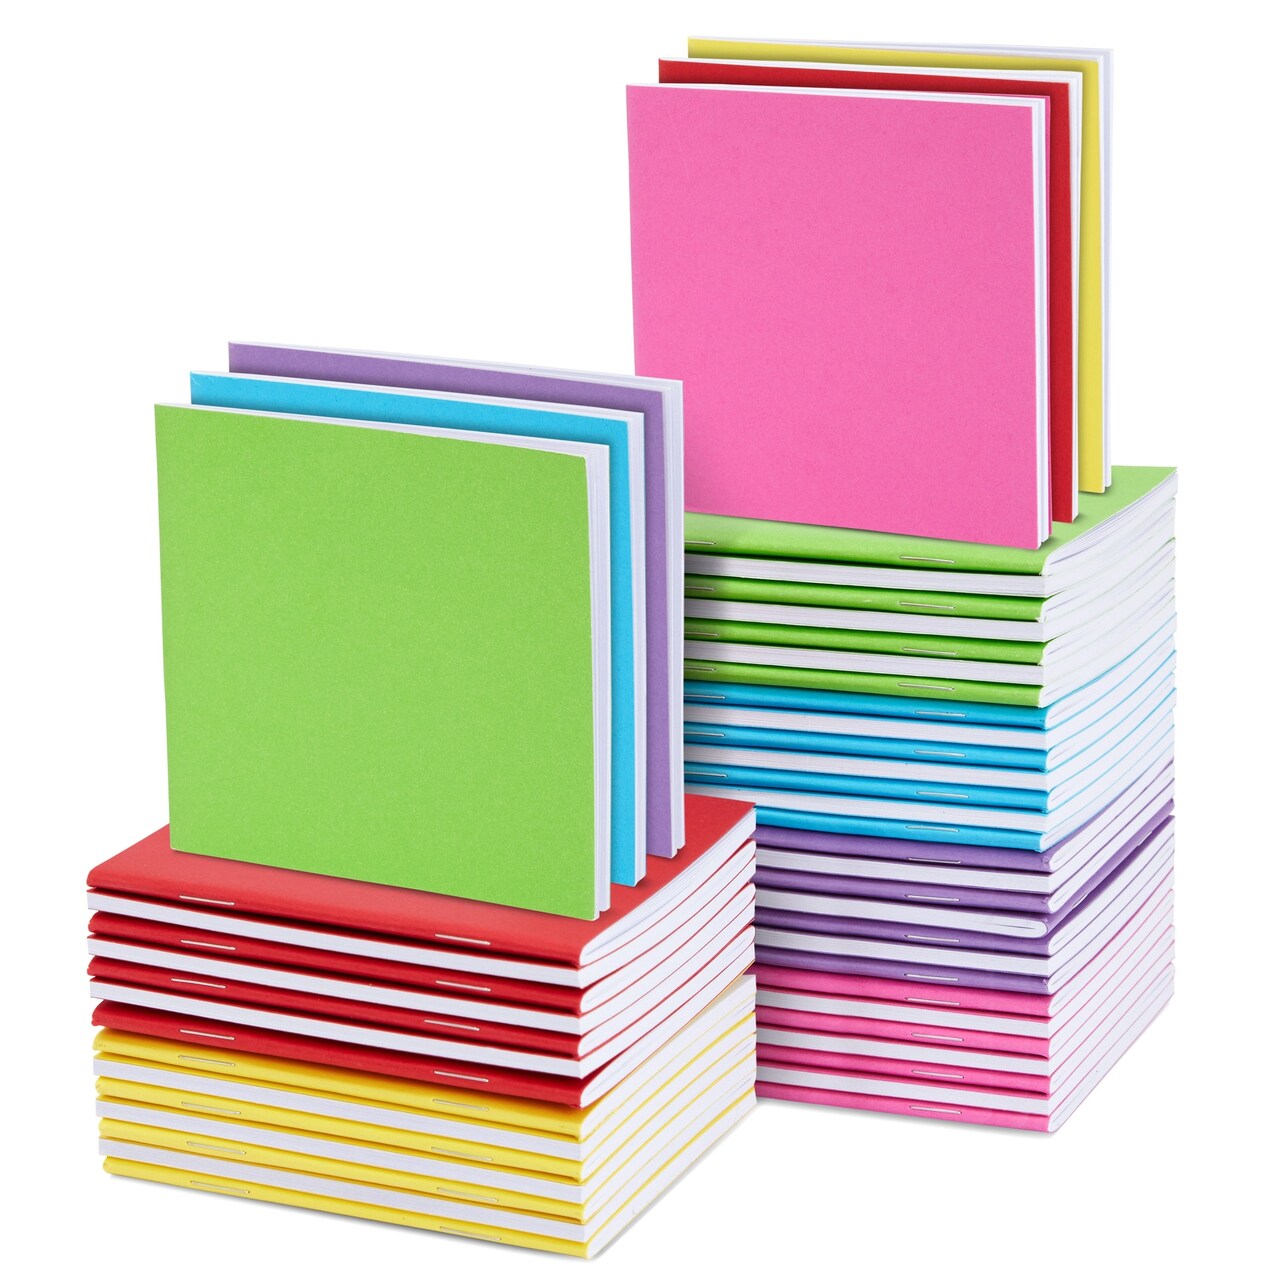 48 Pack Colorful Blank Books, Bulk, Mini Notebooks for Kids, Small Notepads  Journals for Drawing, Writing (6 Colors, 4x4 In)